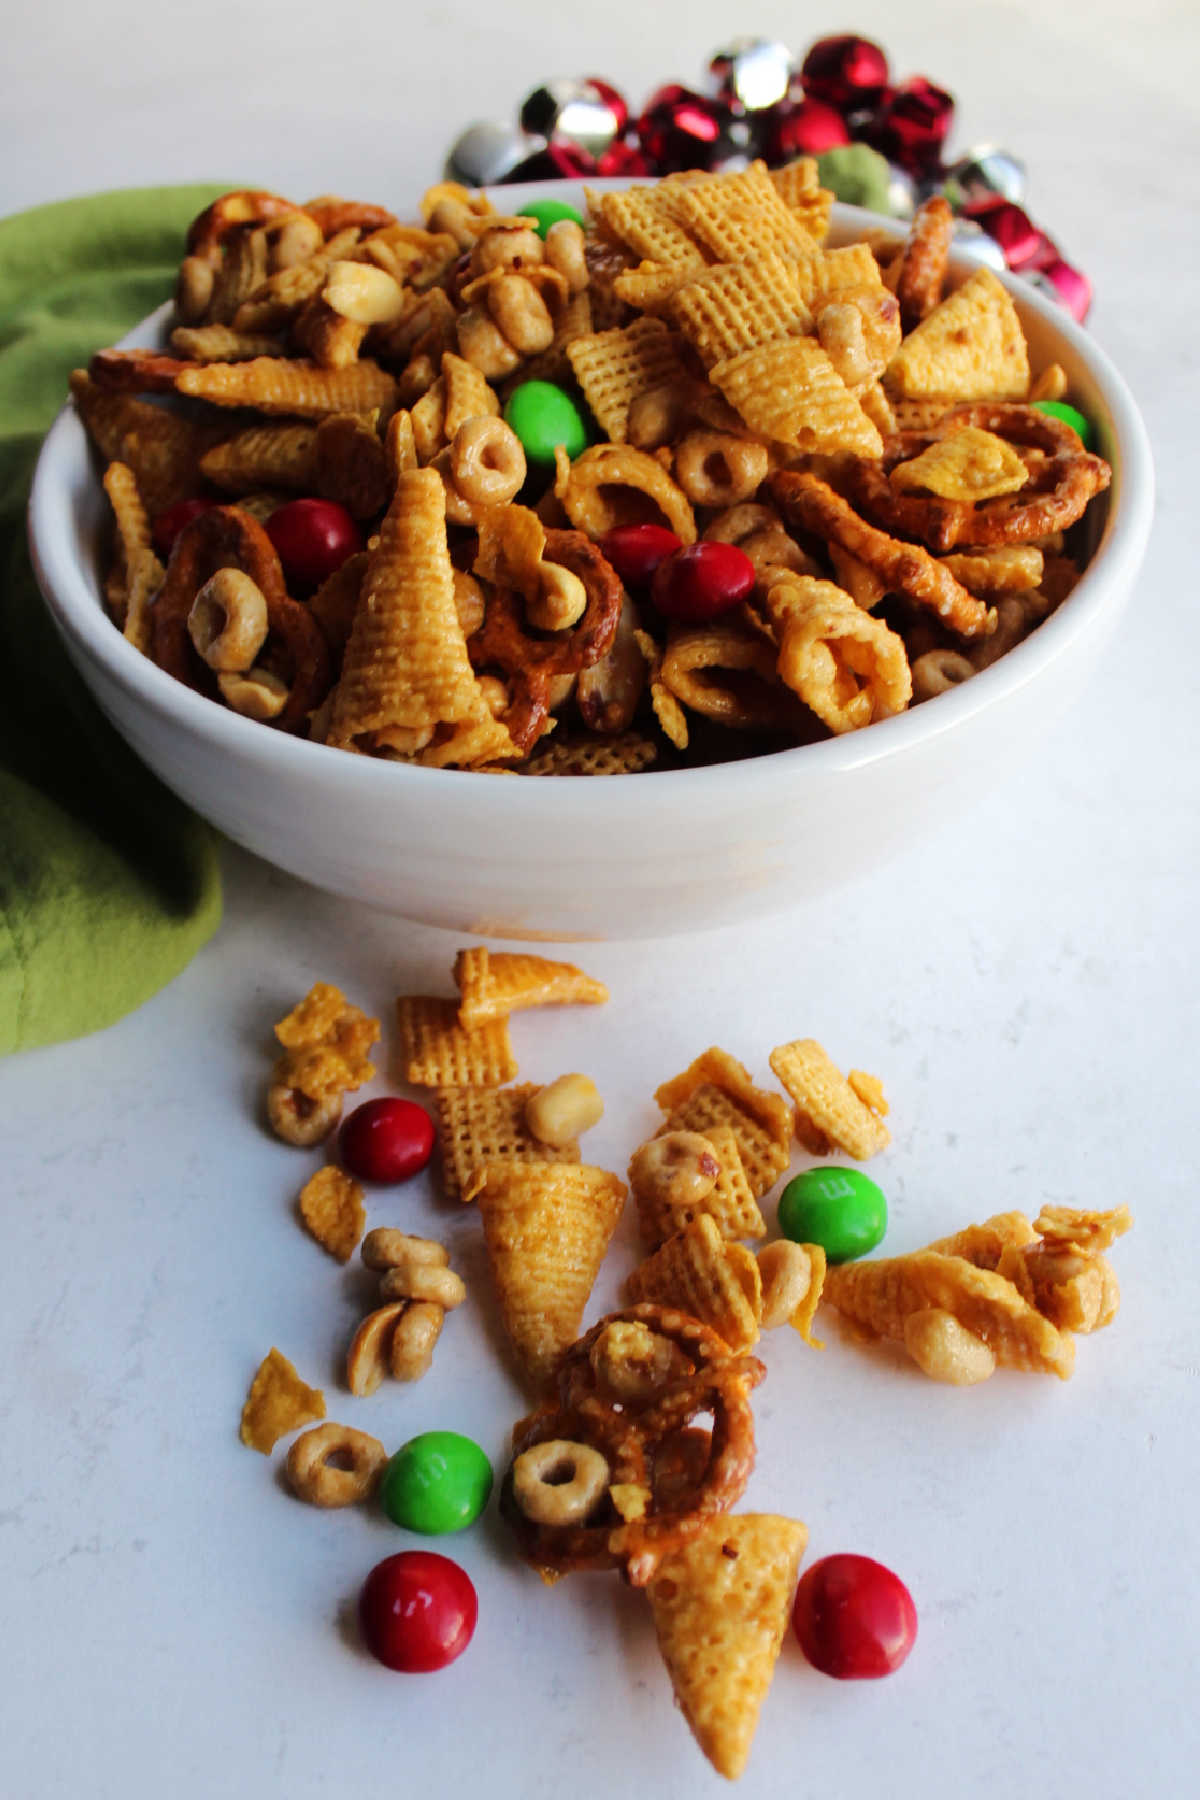 Bowl of crunchy caramel bugle mix with pretzels, cereal, peanuts and red and green M&M's ready to eat. 